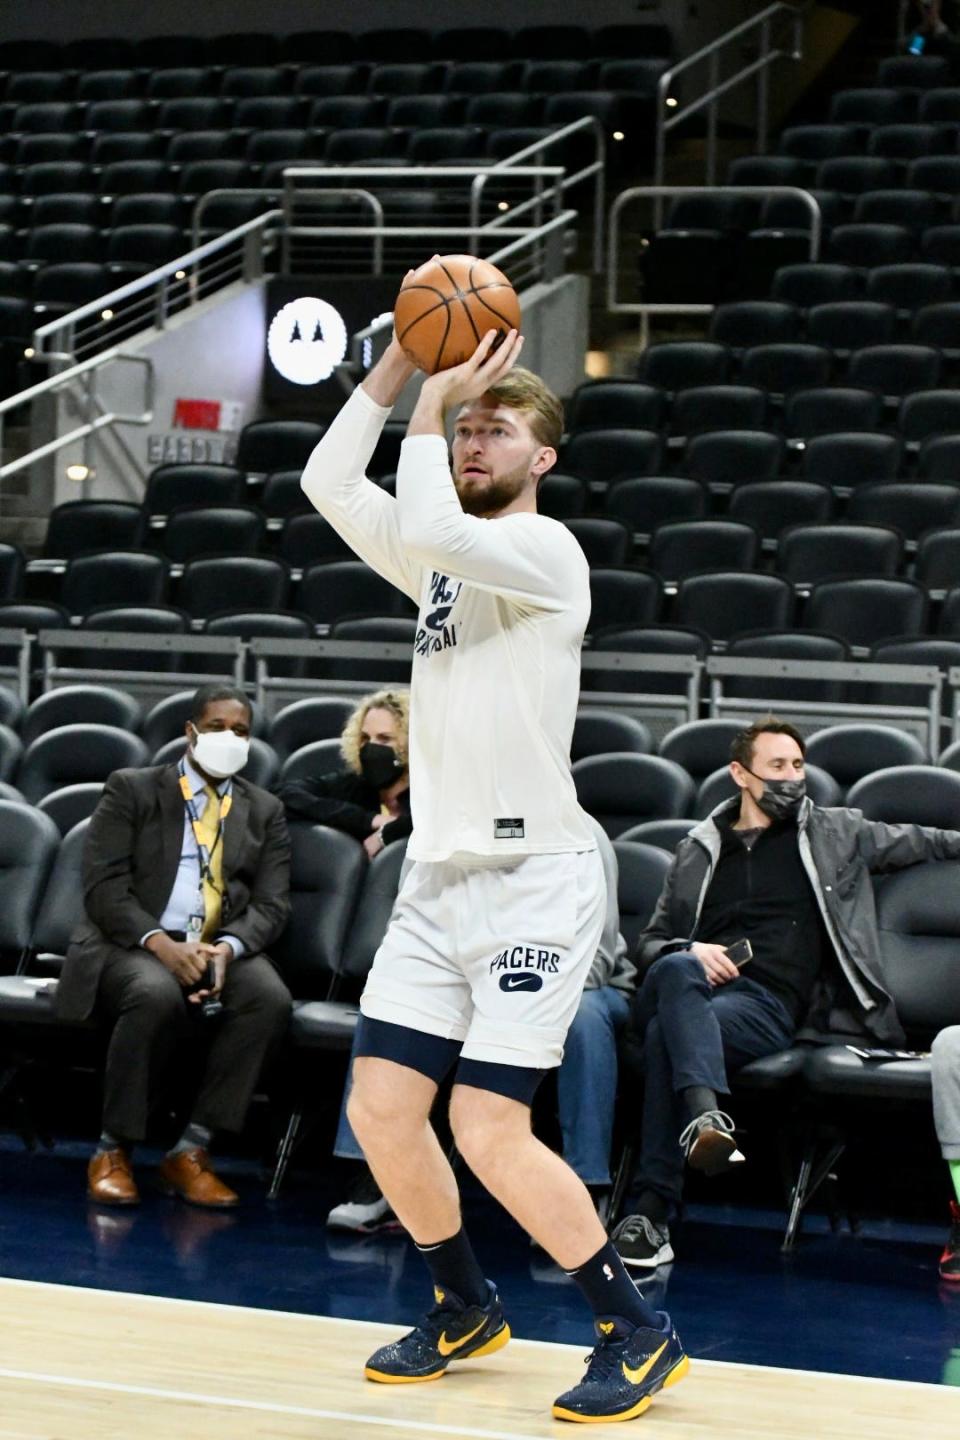 Indiana's Domantas Sabonis shoots a corner 3 during warmups as the Pacers host the Hornets at Gainbridge Fieldhouse in Indianapolis on Jan. 26, 2022.